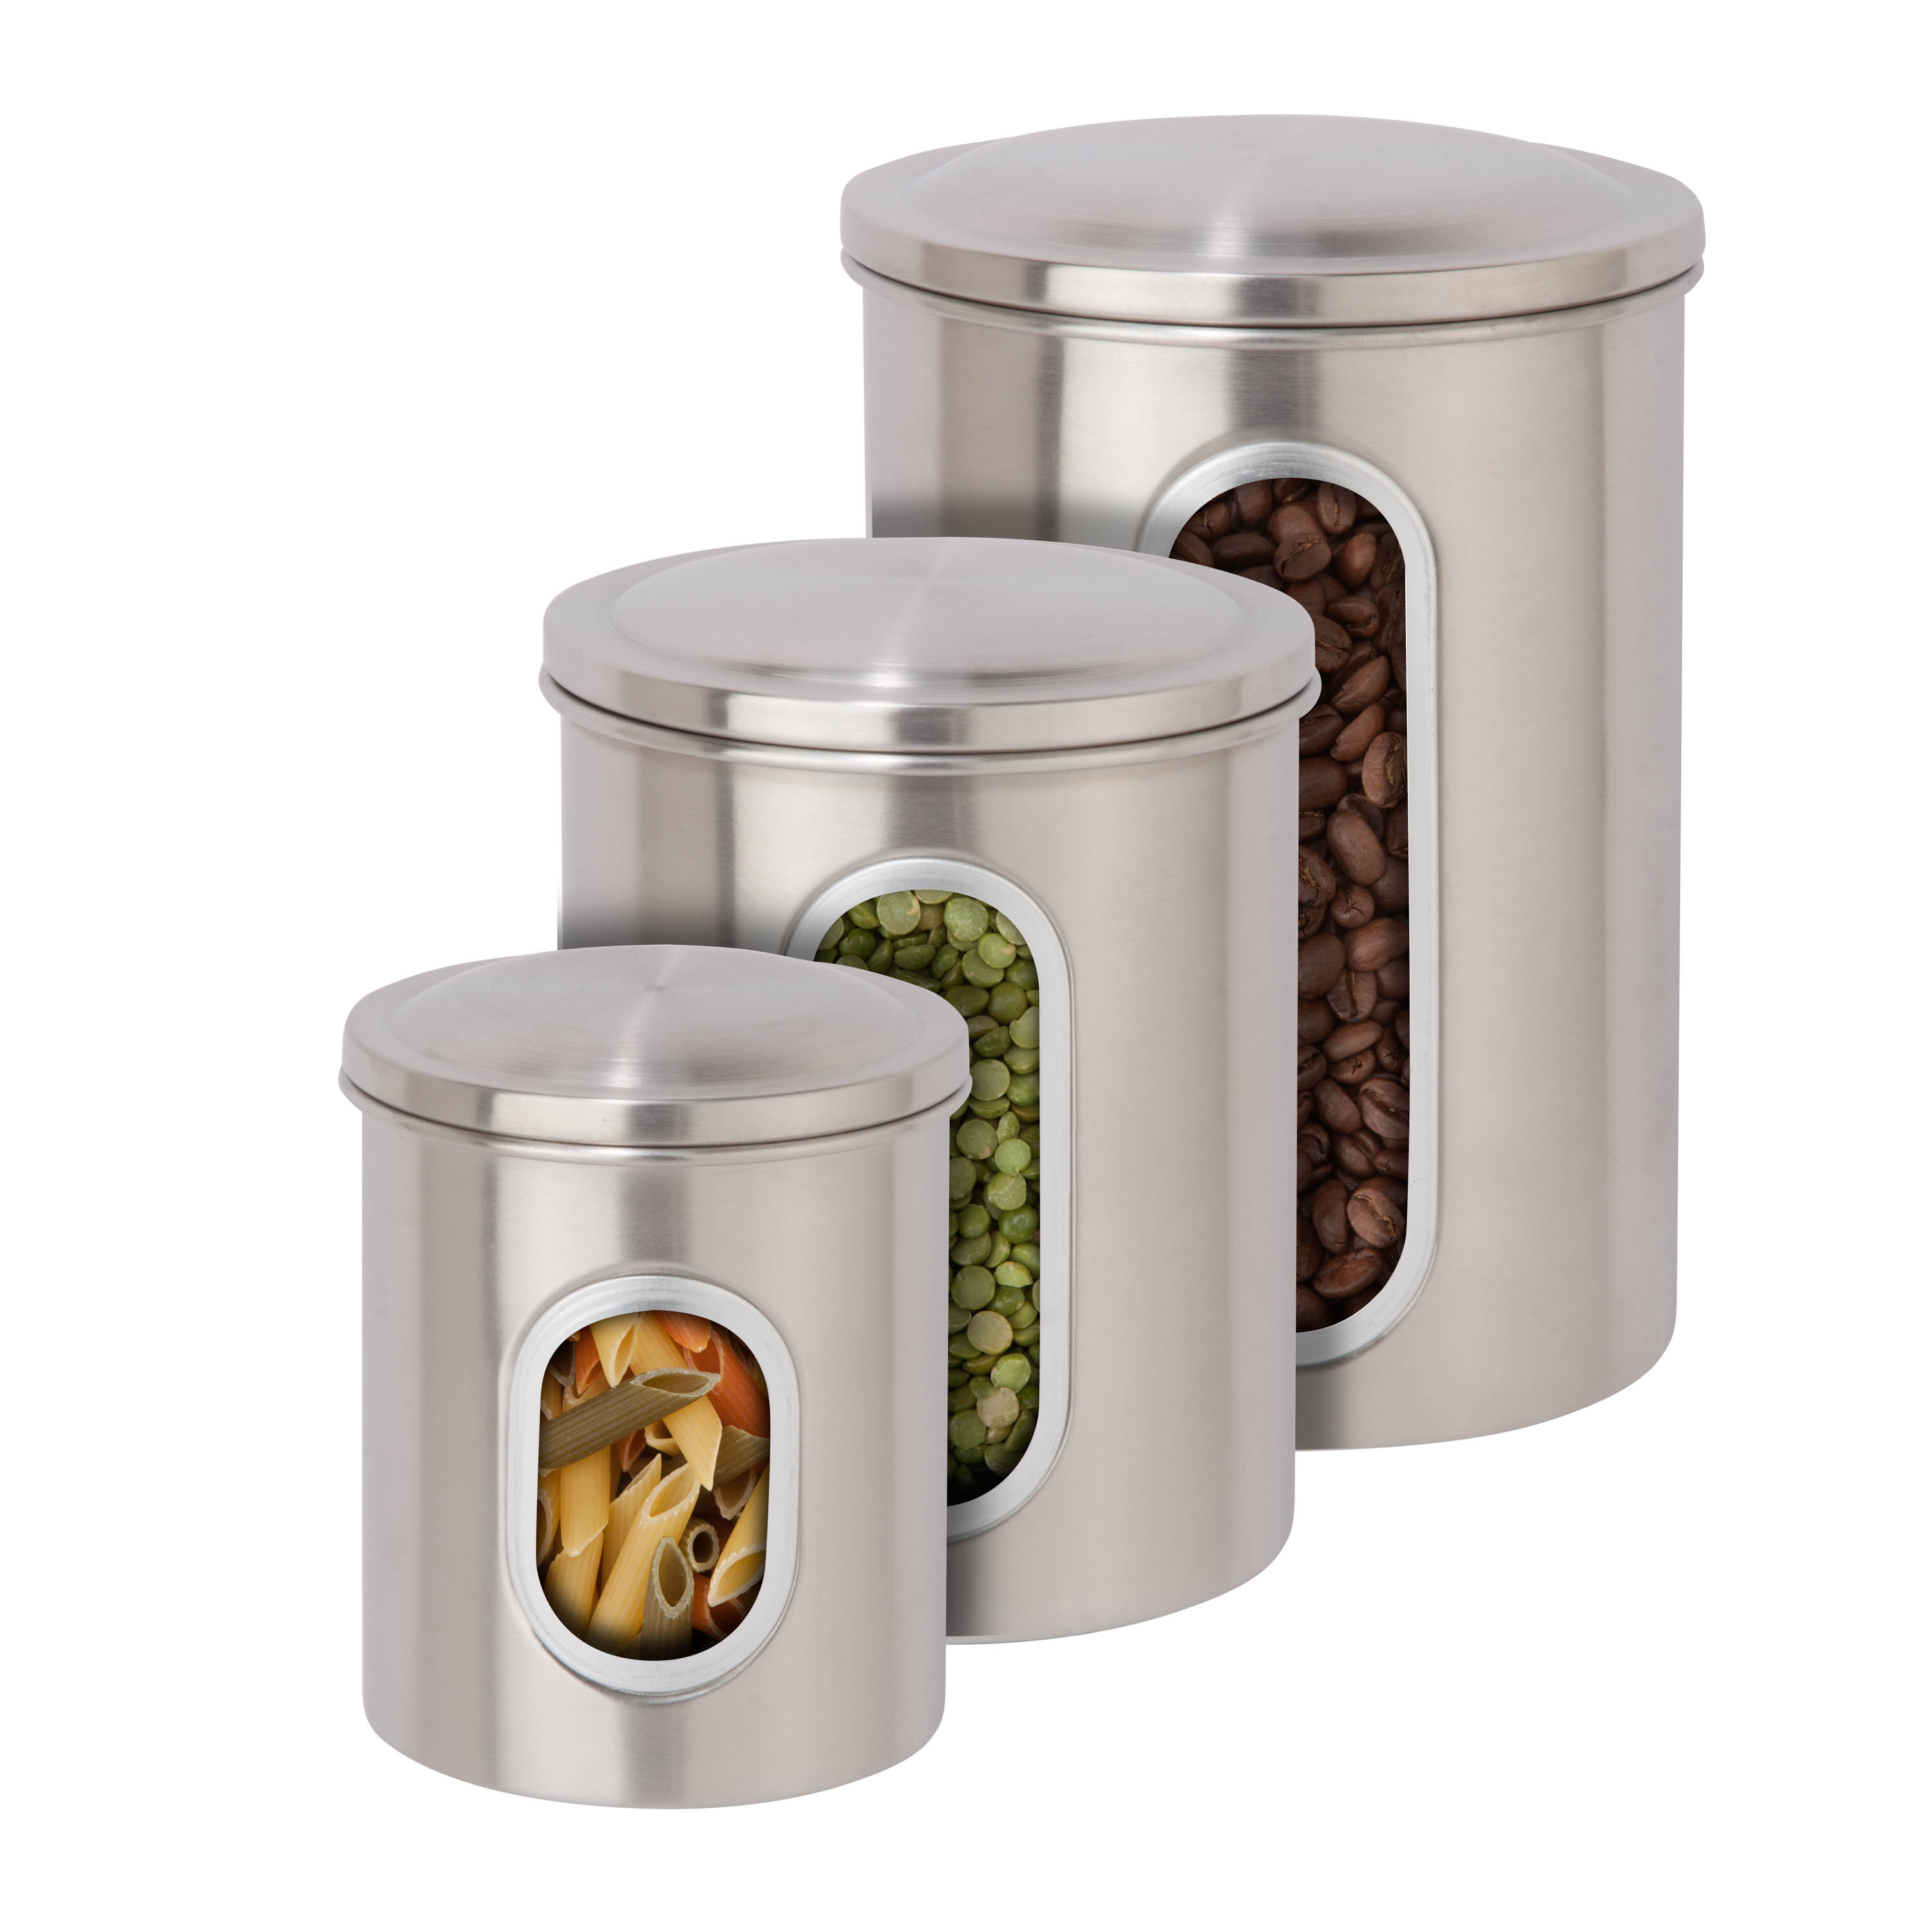 Honey-Can-Do Stainless Steel 3-Piece Nesting Kitchen Canister Set, Silver - image 3 of 5